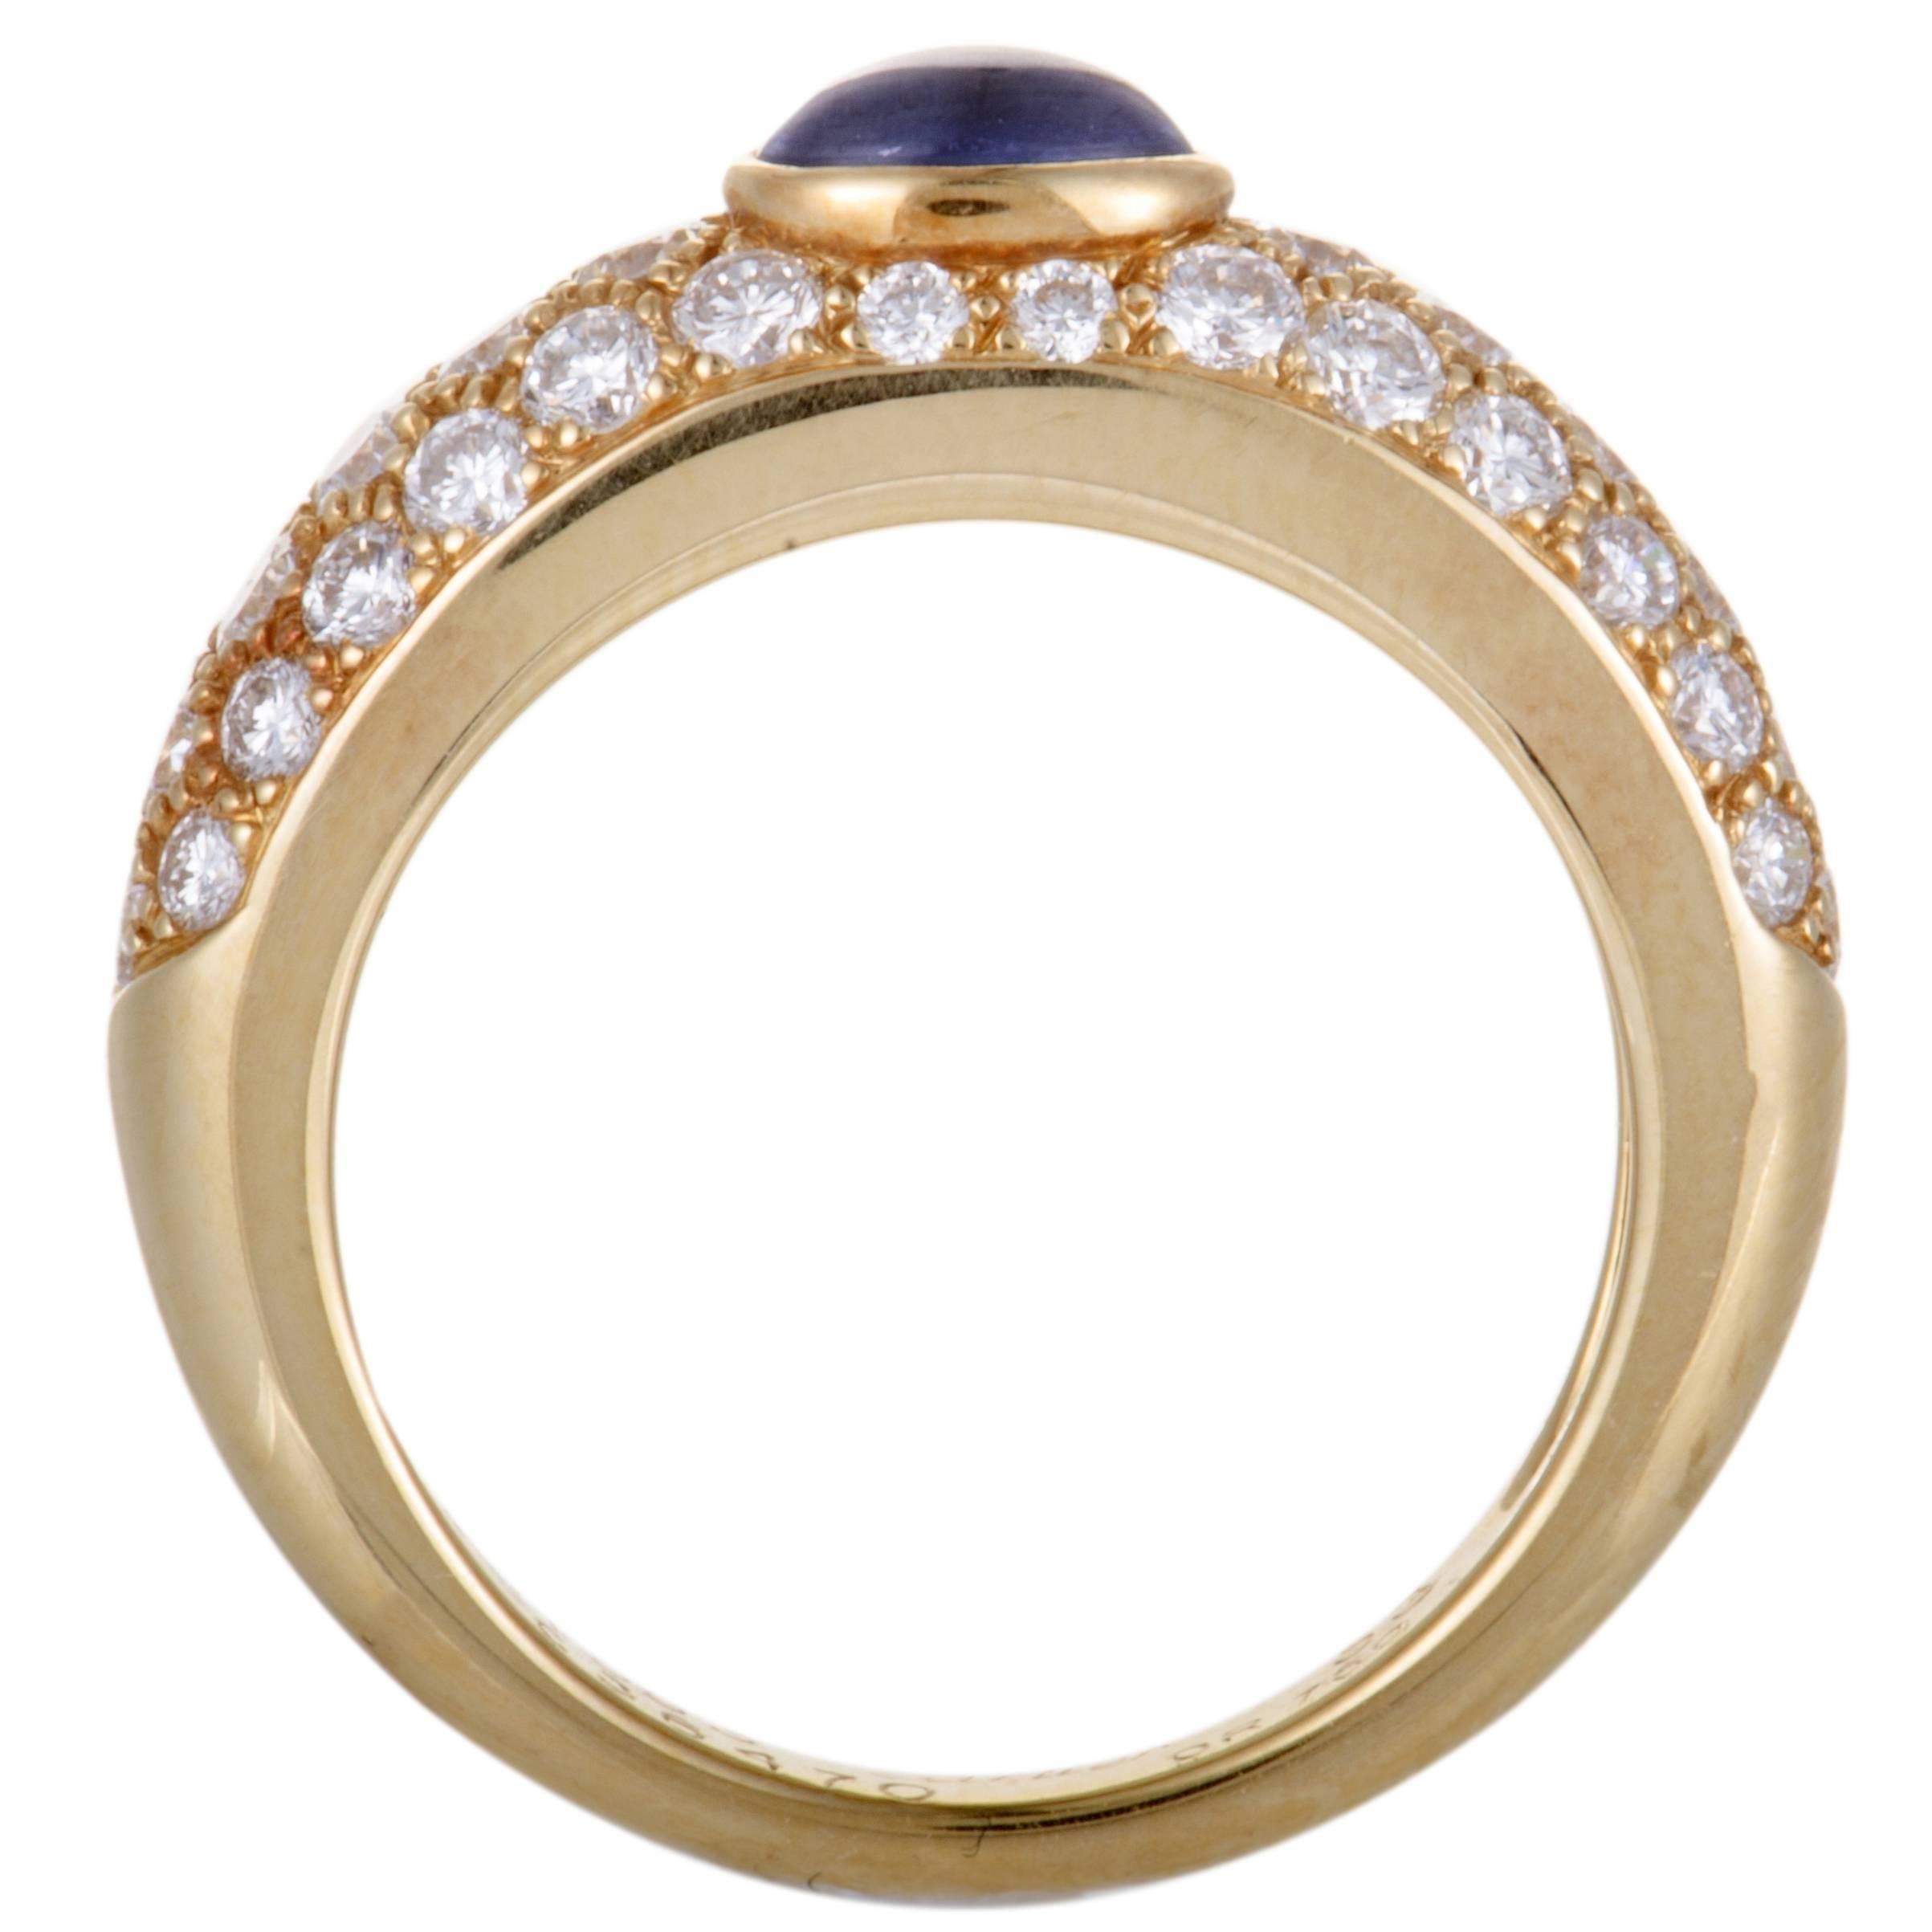 Offering a look of absolute class and refinement that the famous brand is renowned for, this splendid Cartier ring is a jewelry piece that will accentuate your attire in the most elegant manner. The ring is made of 18K yellow gold and set with an